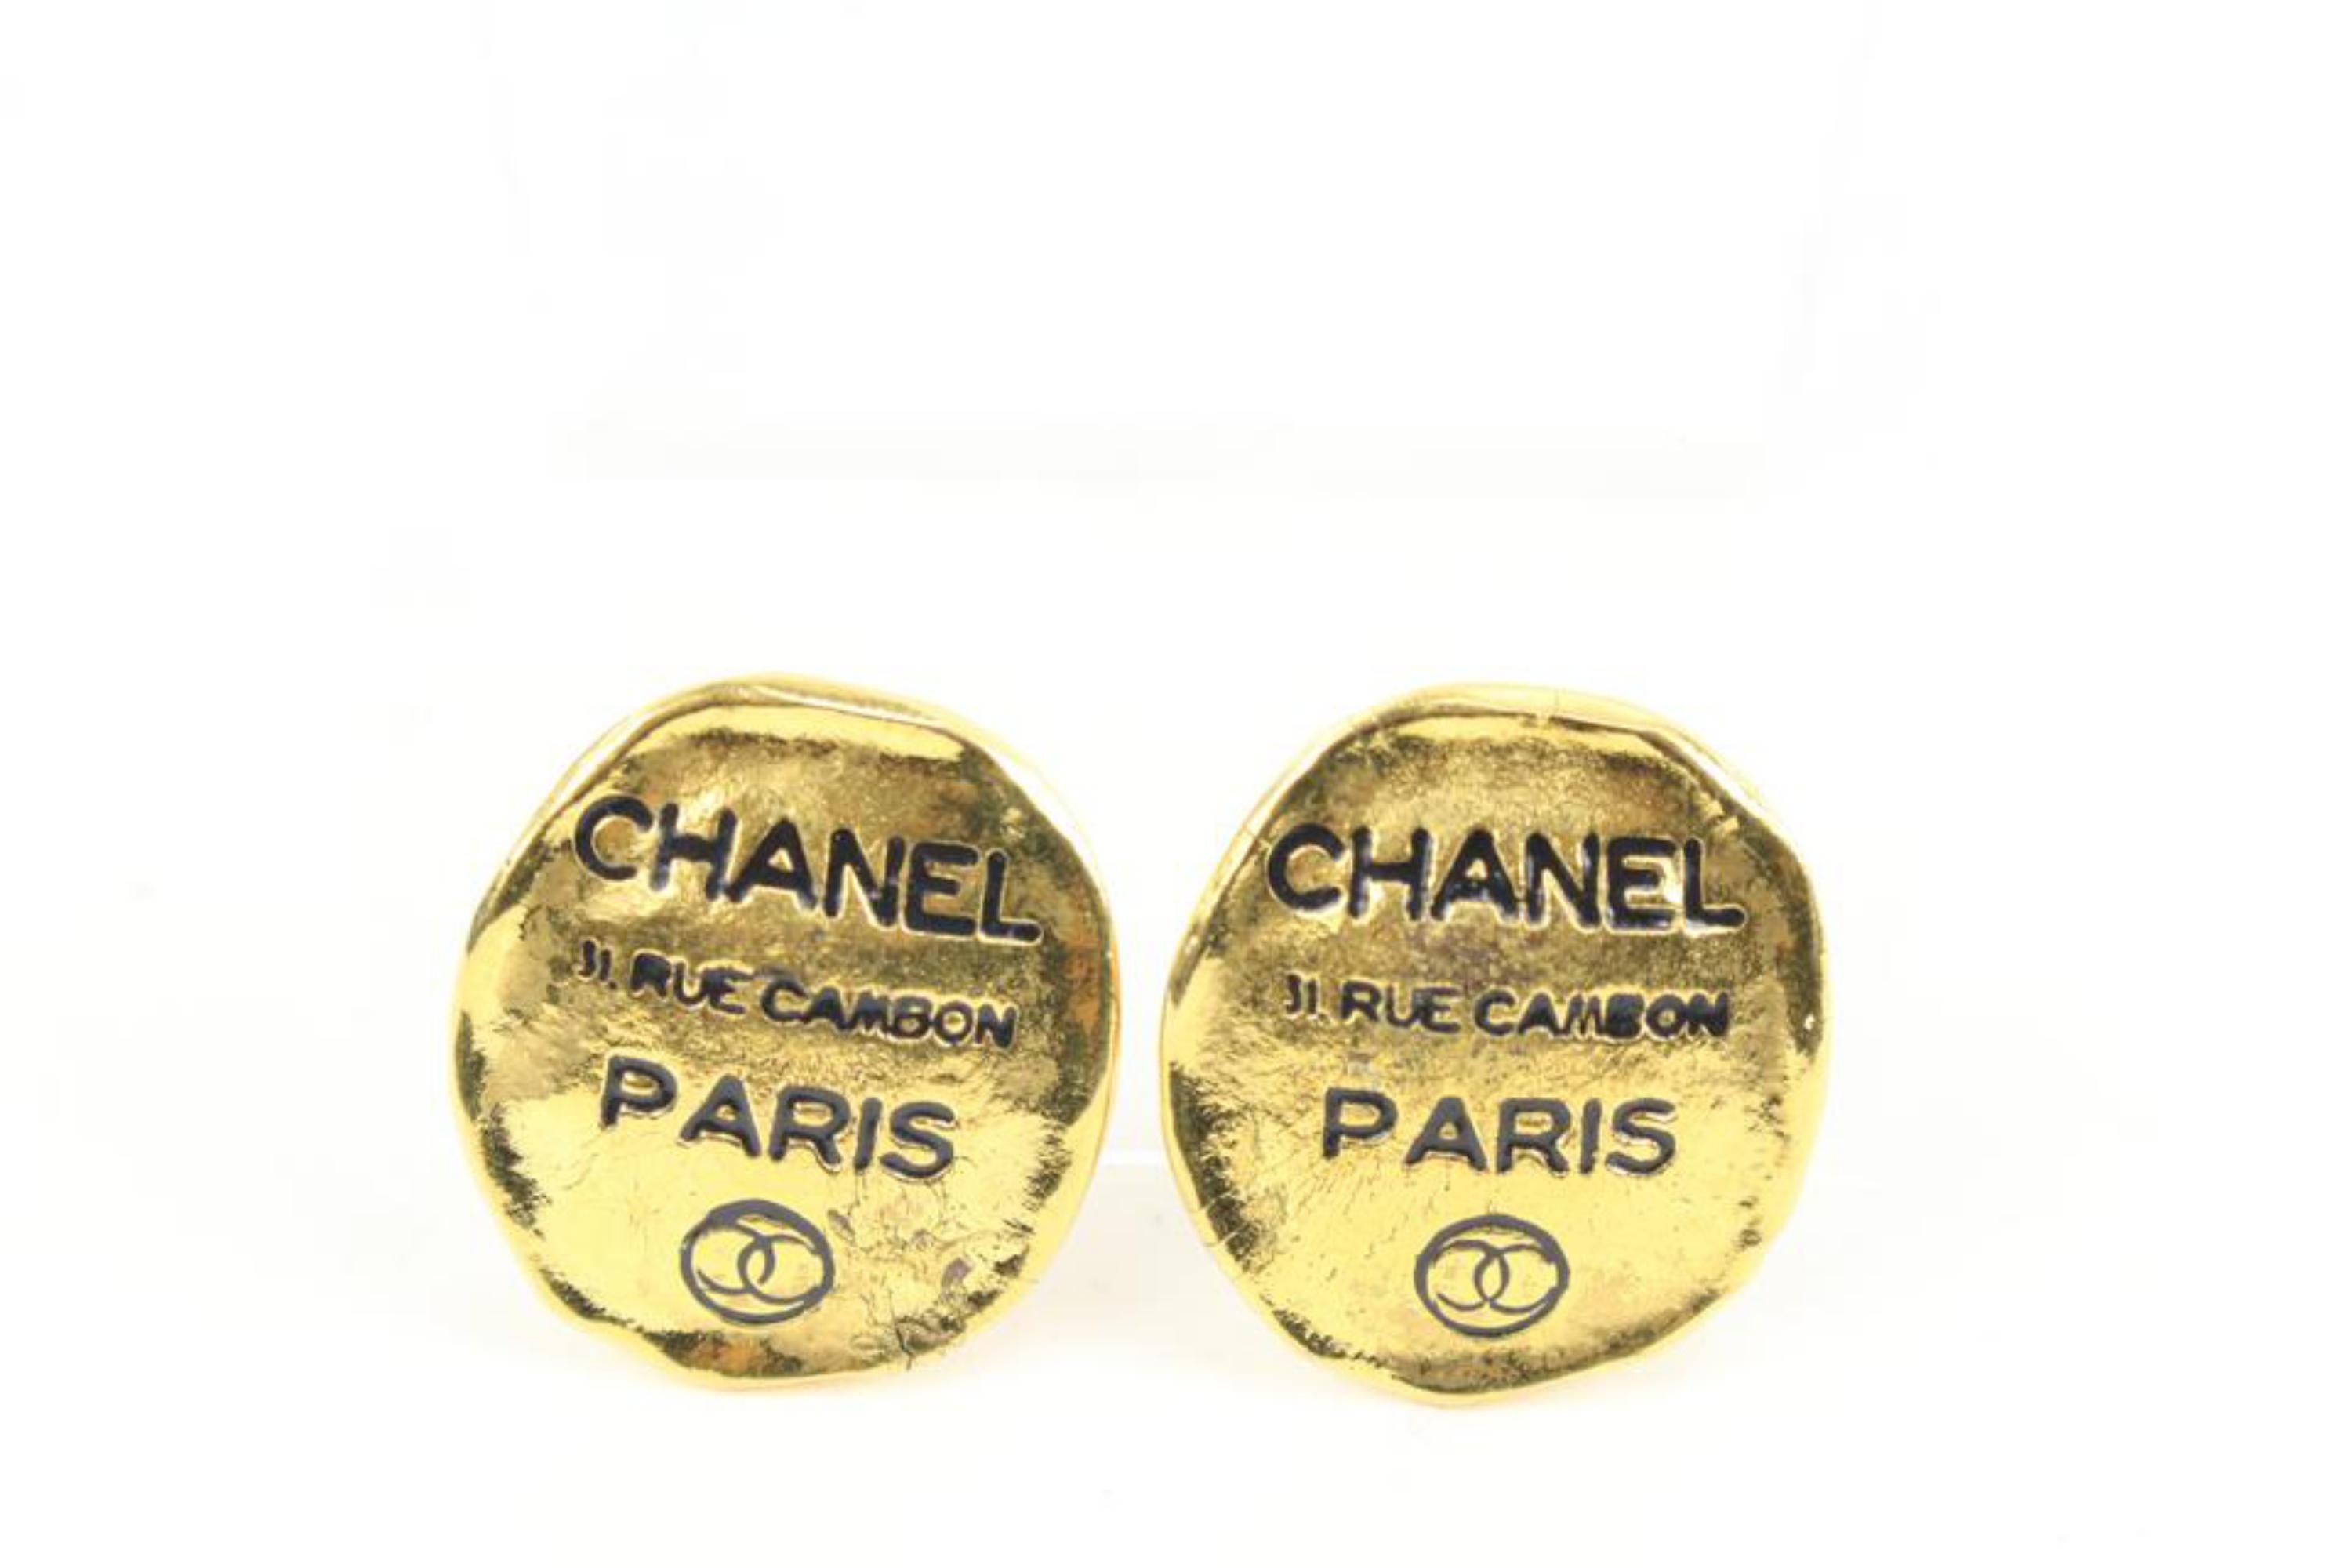 Chanel 1980's Hammered Gold 31 Rue Cambon Paris Earrings 71cz418s 2